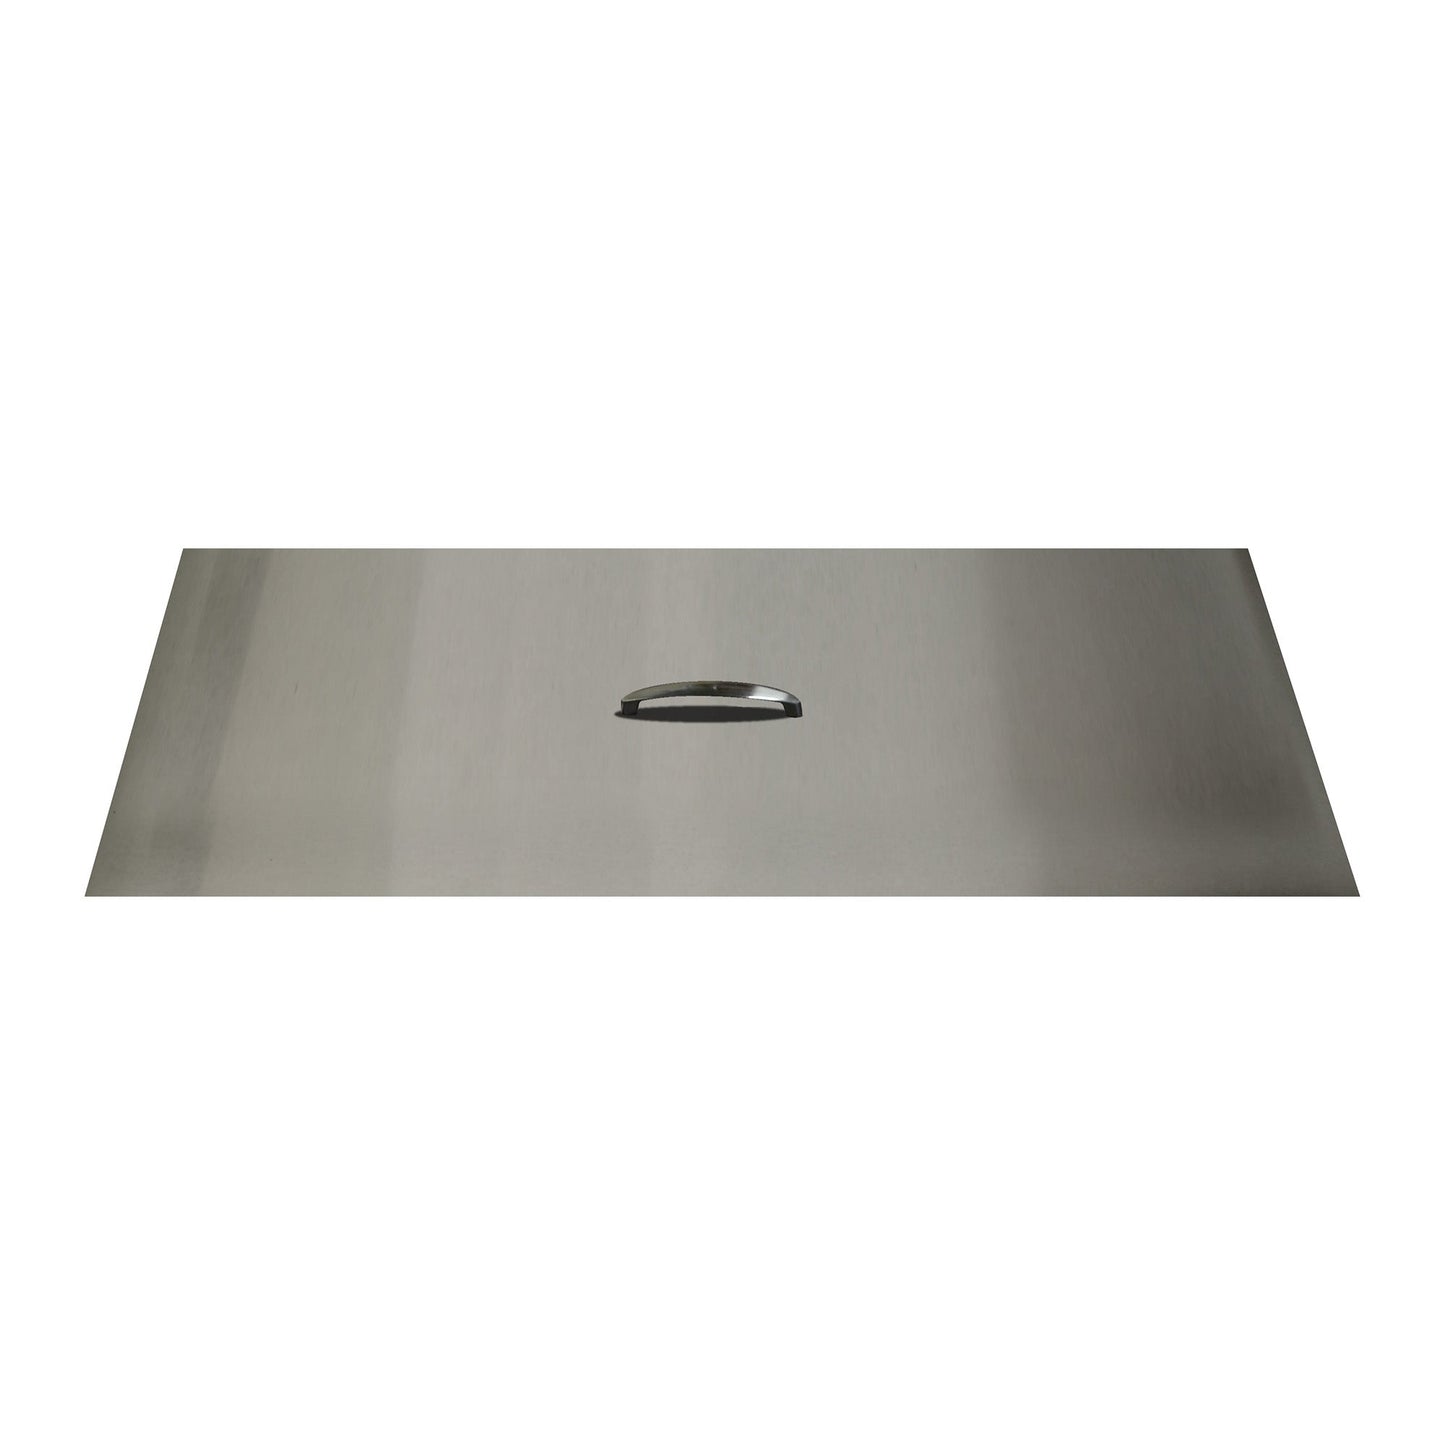 The Outdoor Plus 10" x 52" Stainless Steel Rectangular Fire Pit Lid Cover